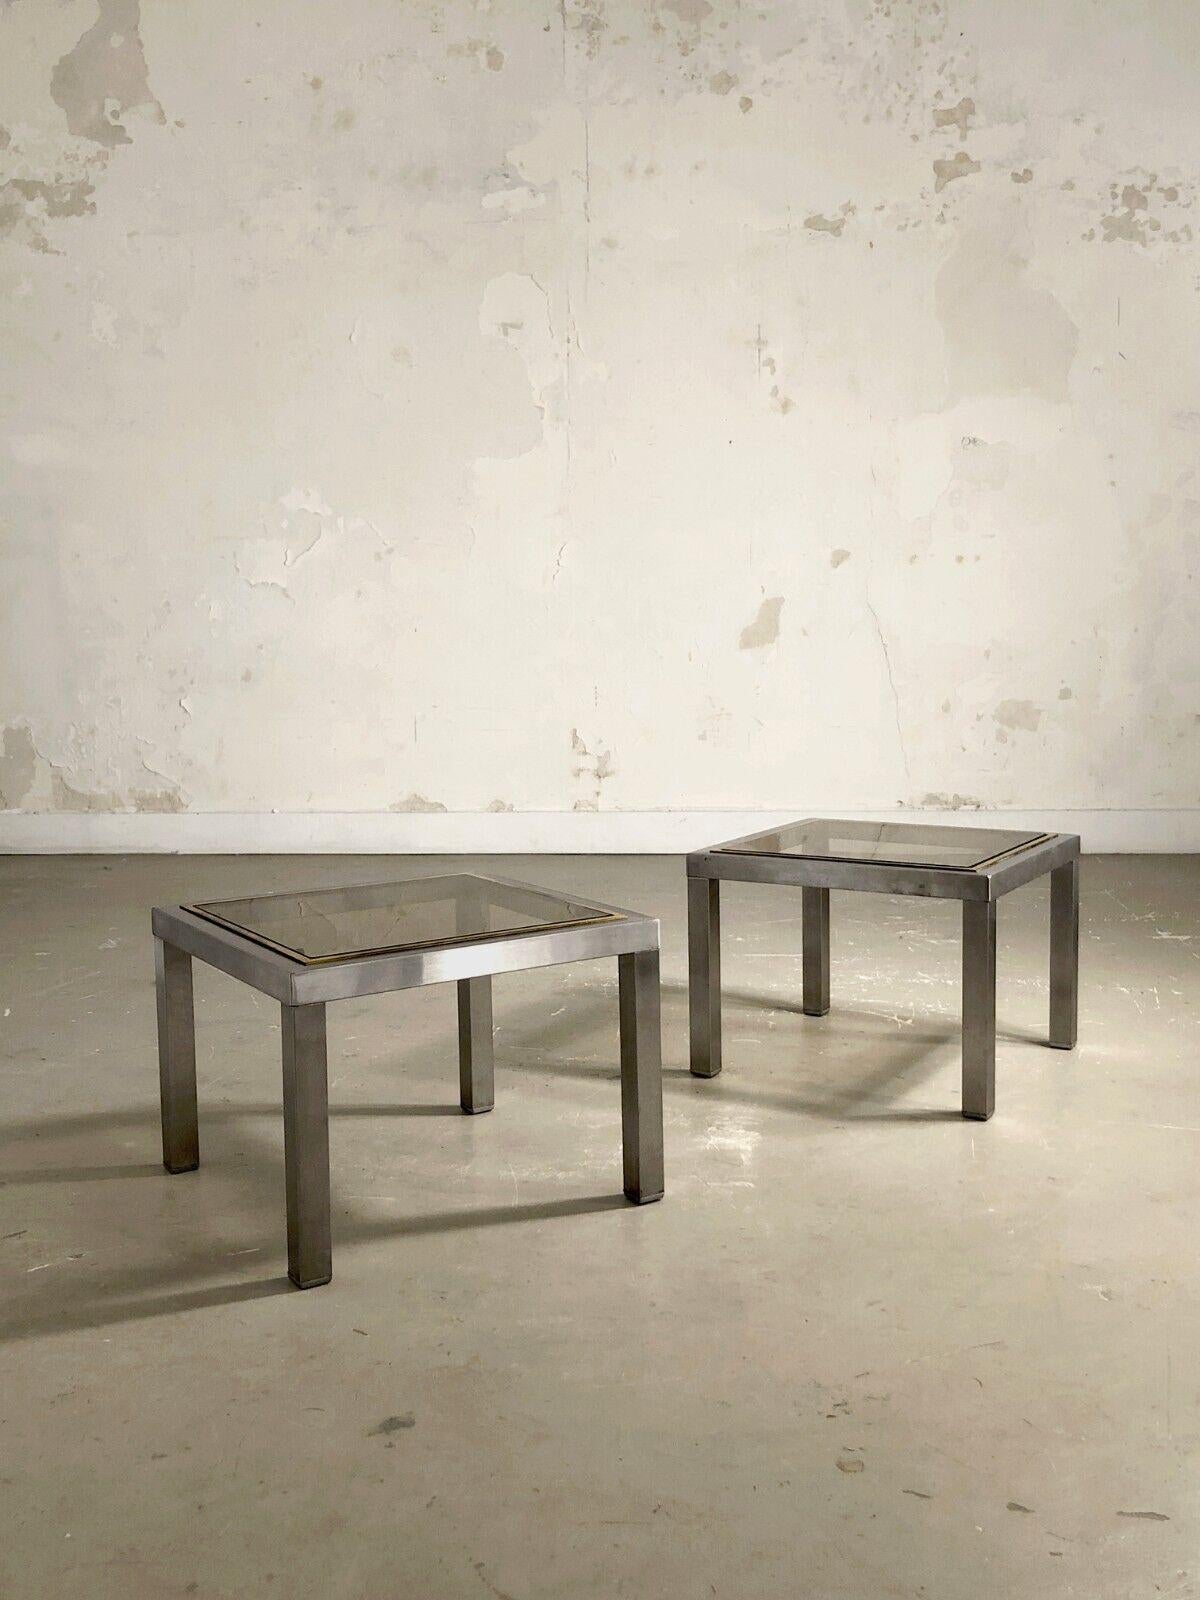 An elegant and rigorous pair of bedside tables, end tables or side tables, Post-Modernist, Radical, Constructivist, Shabby-Chic, geometric structure in brushed metal with a square section, square smoked glass tops surrounded by fine golden brass